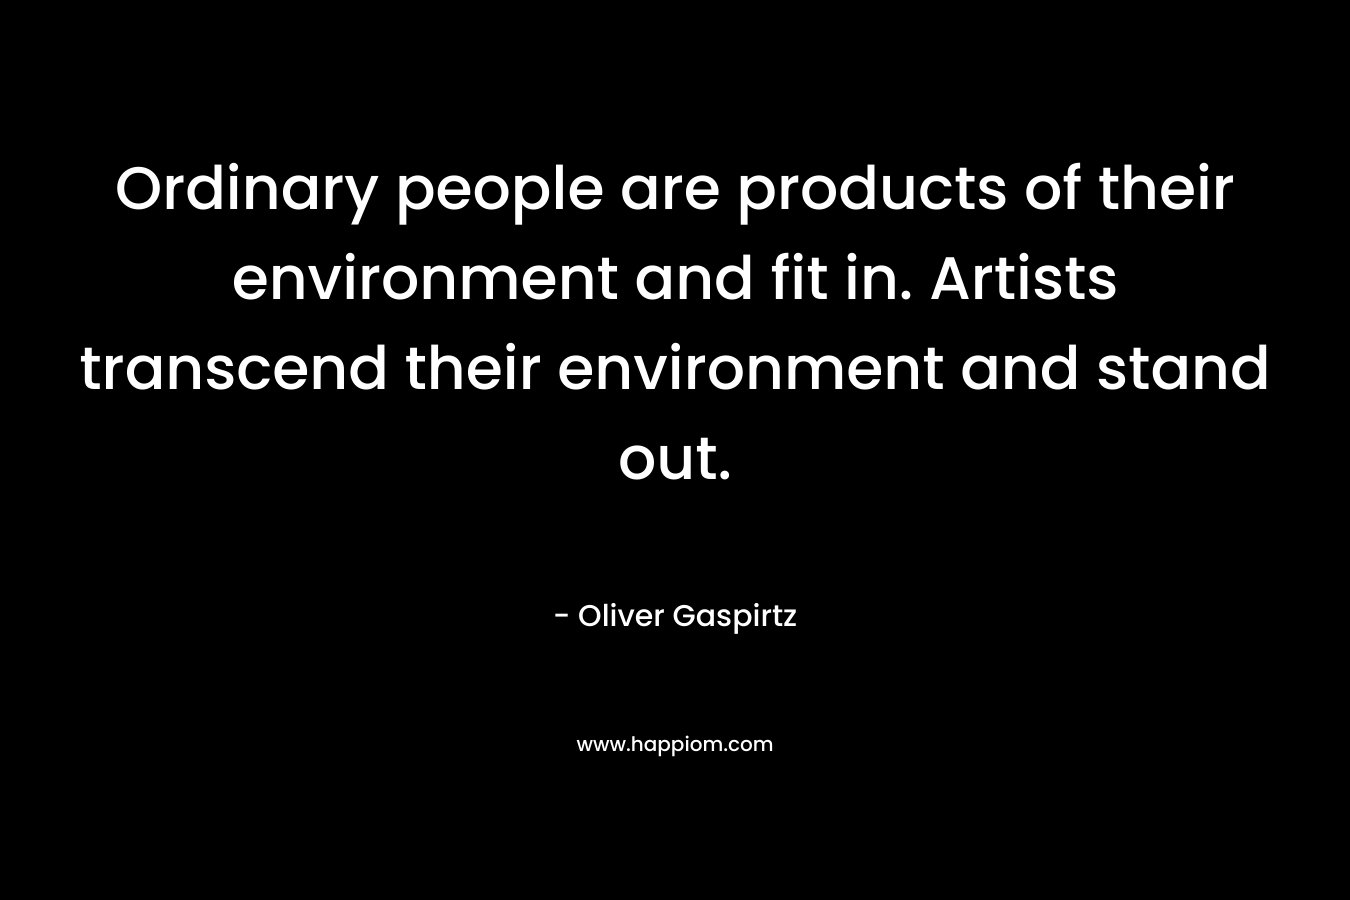 Ordinary people are products of their environment and fit in. Artists transcend their environment and stand out.